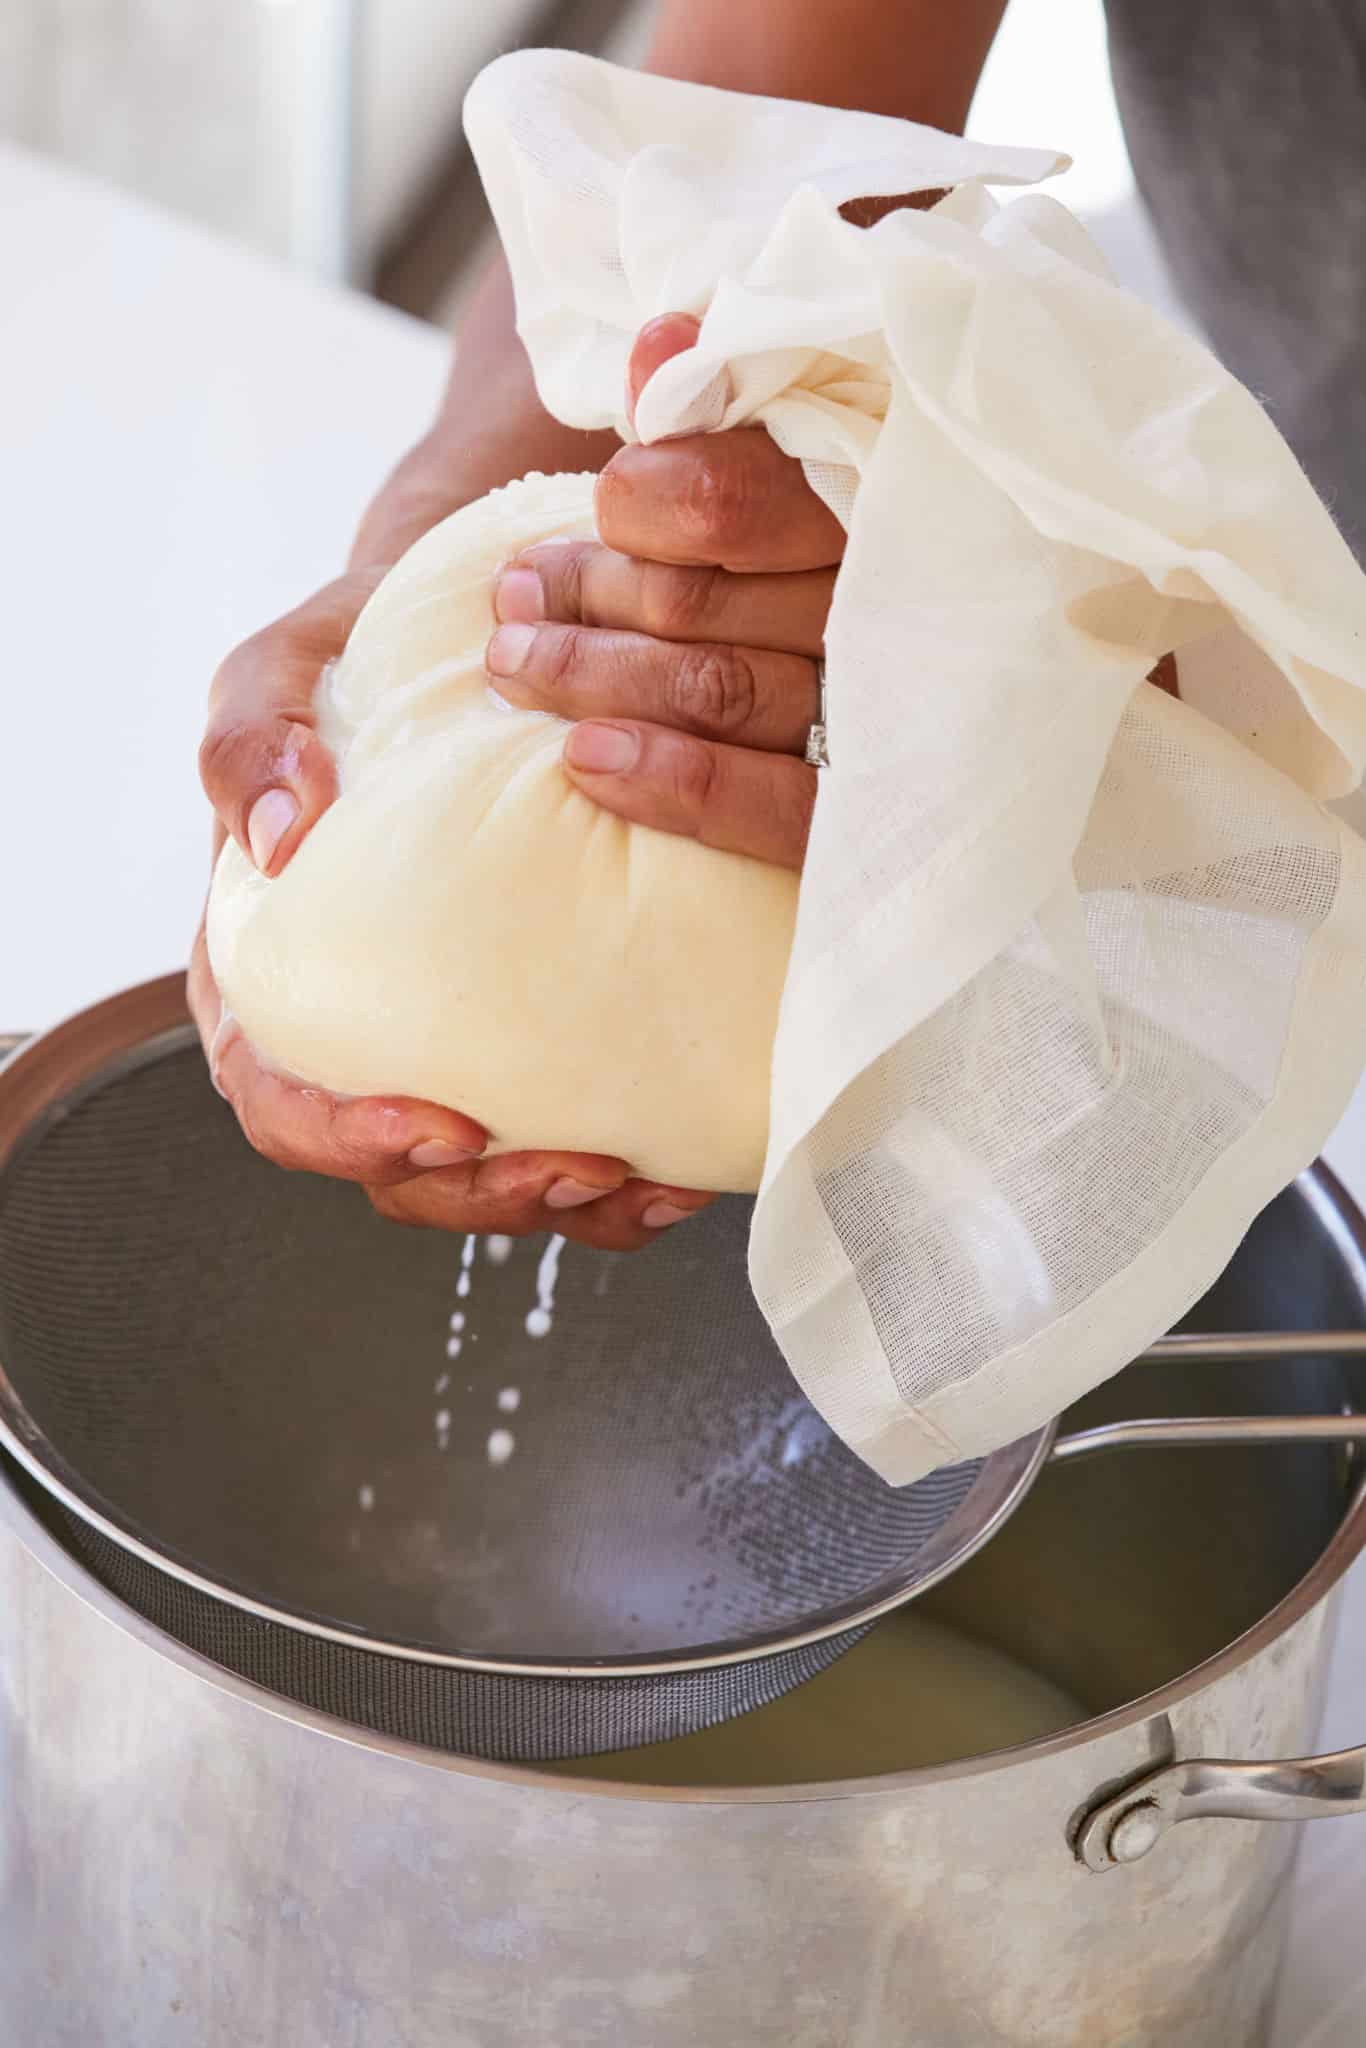 Firmly press on the curds to squeeze out as much whey as possible, using the cheesecloth to help squeeze.